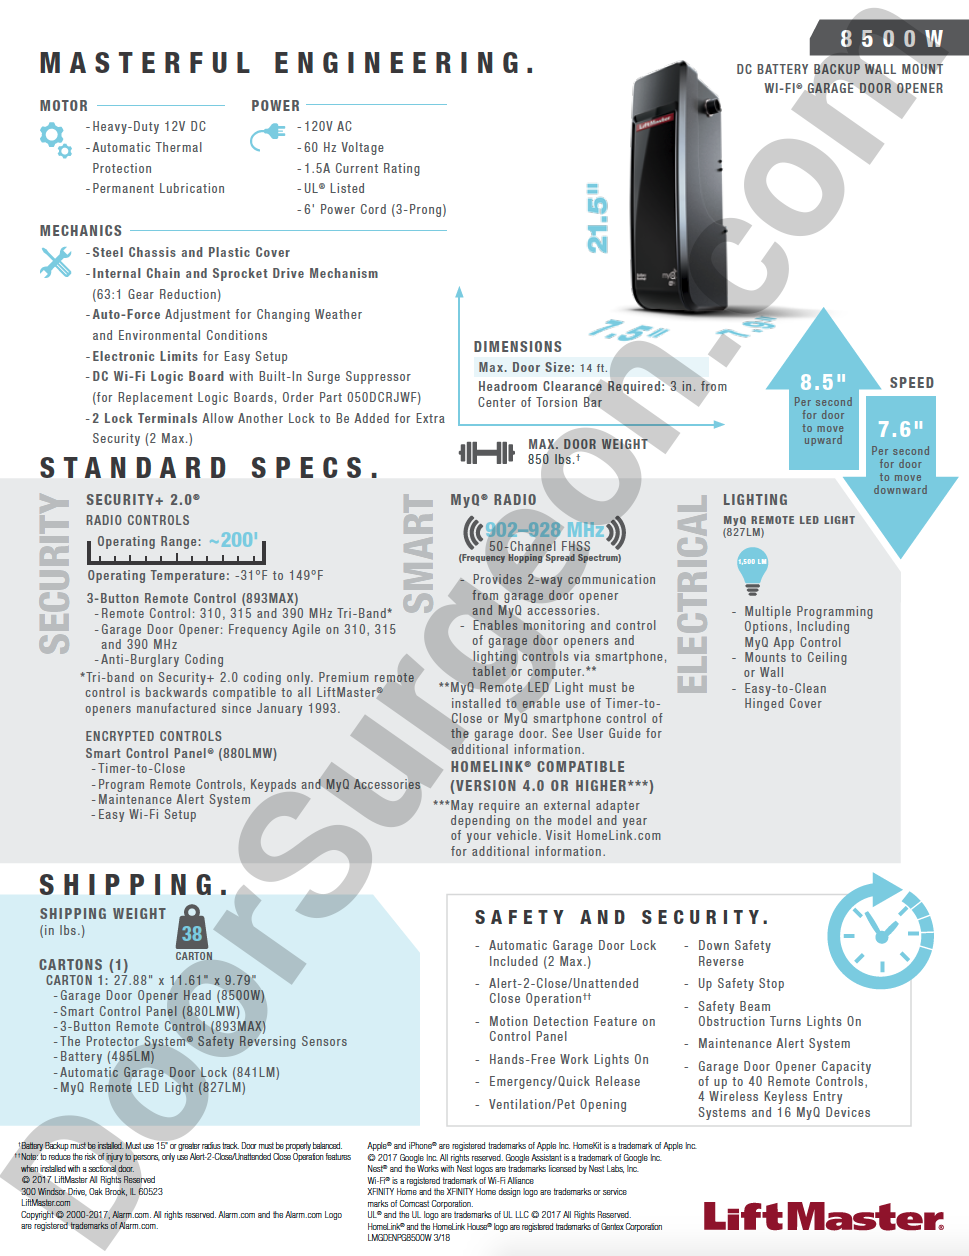 liftmaster 8500 specification sheets